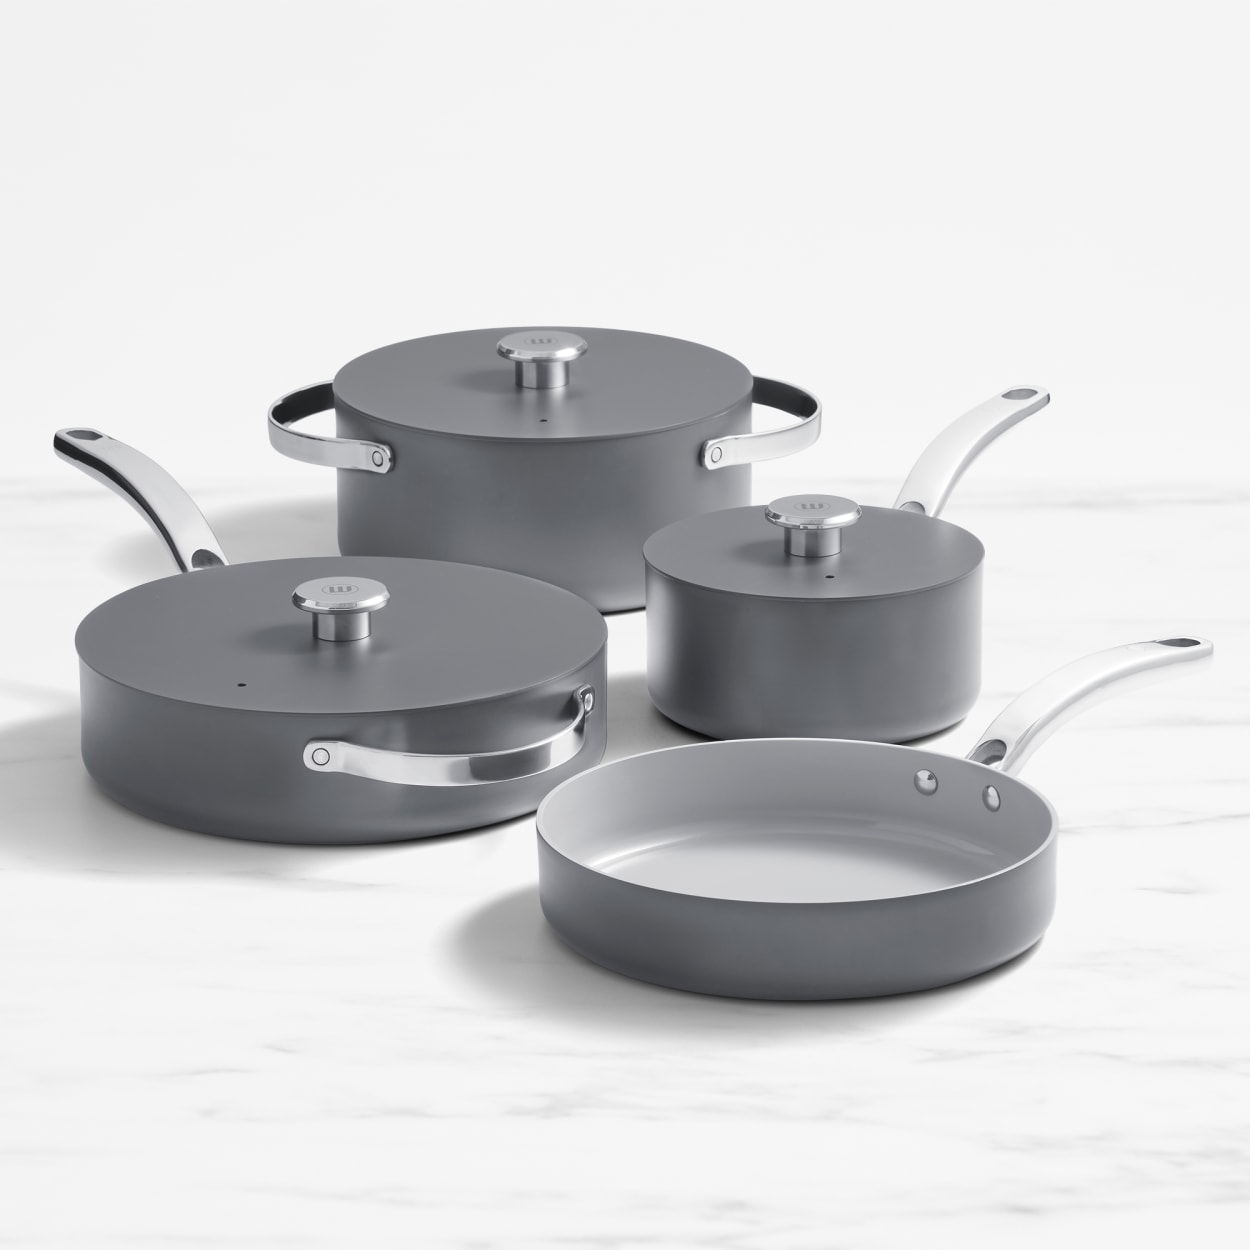 https://res.cloudinary.com/kitchenwarehouse/image/upload/c_fill,g_face,w_1250/f_auto/v1699249159/Kitchen%20Warehouse%20Images%20/Wolstead-Mineral-4pc-Cookware-Set-Grey-HERO_01.jpg